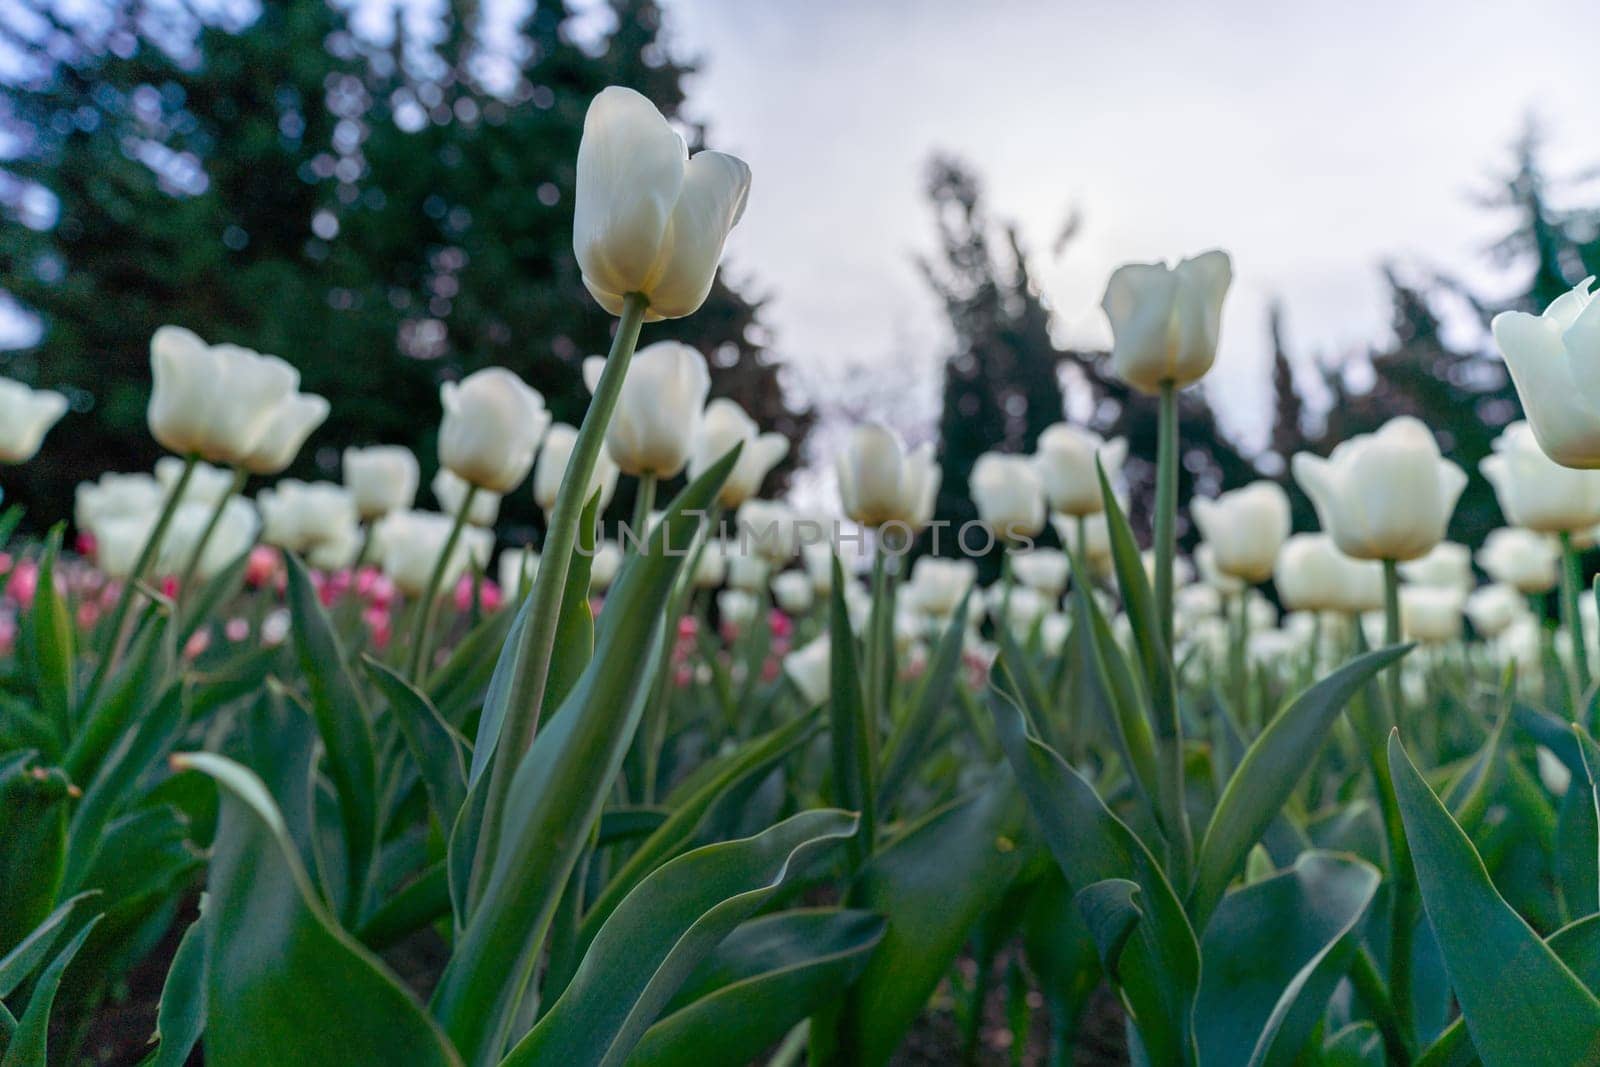 Tulip in a flower bed, white flowers against the sky and trees, spring flowers. by Matiunina